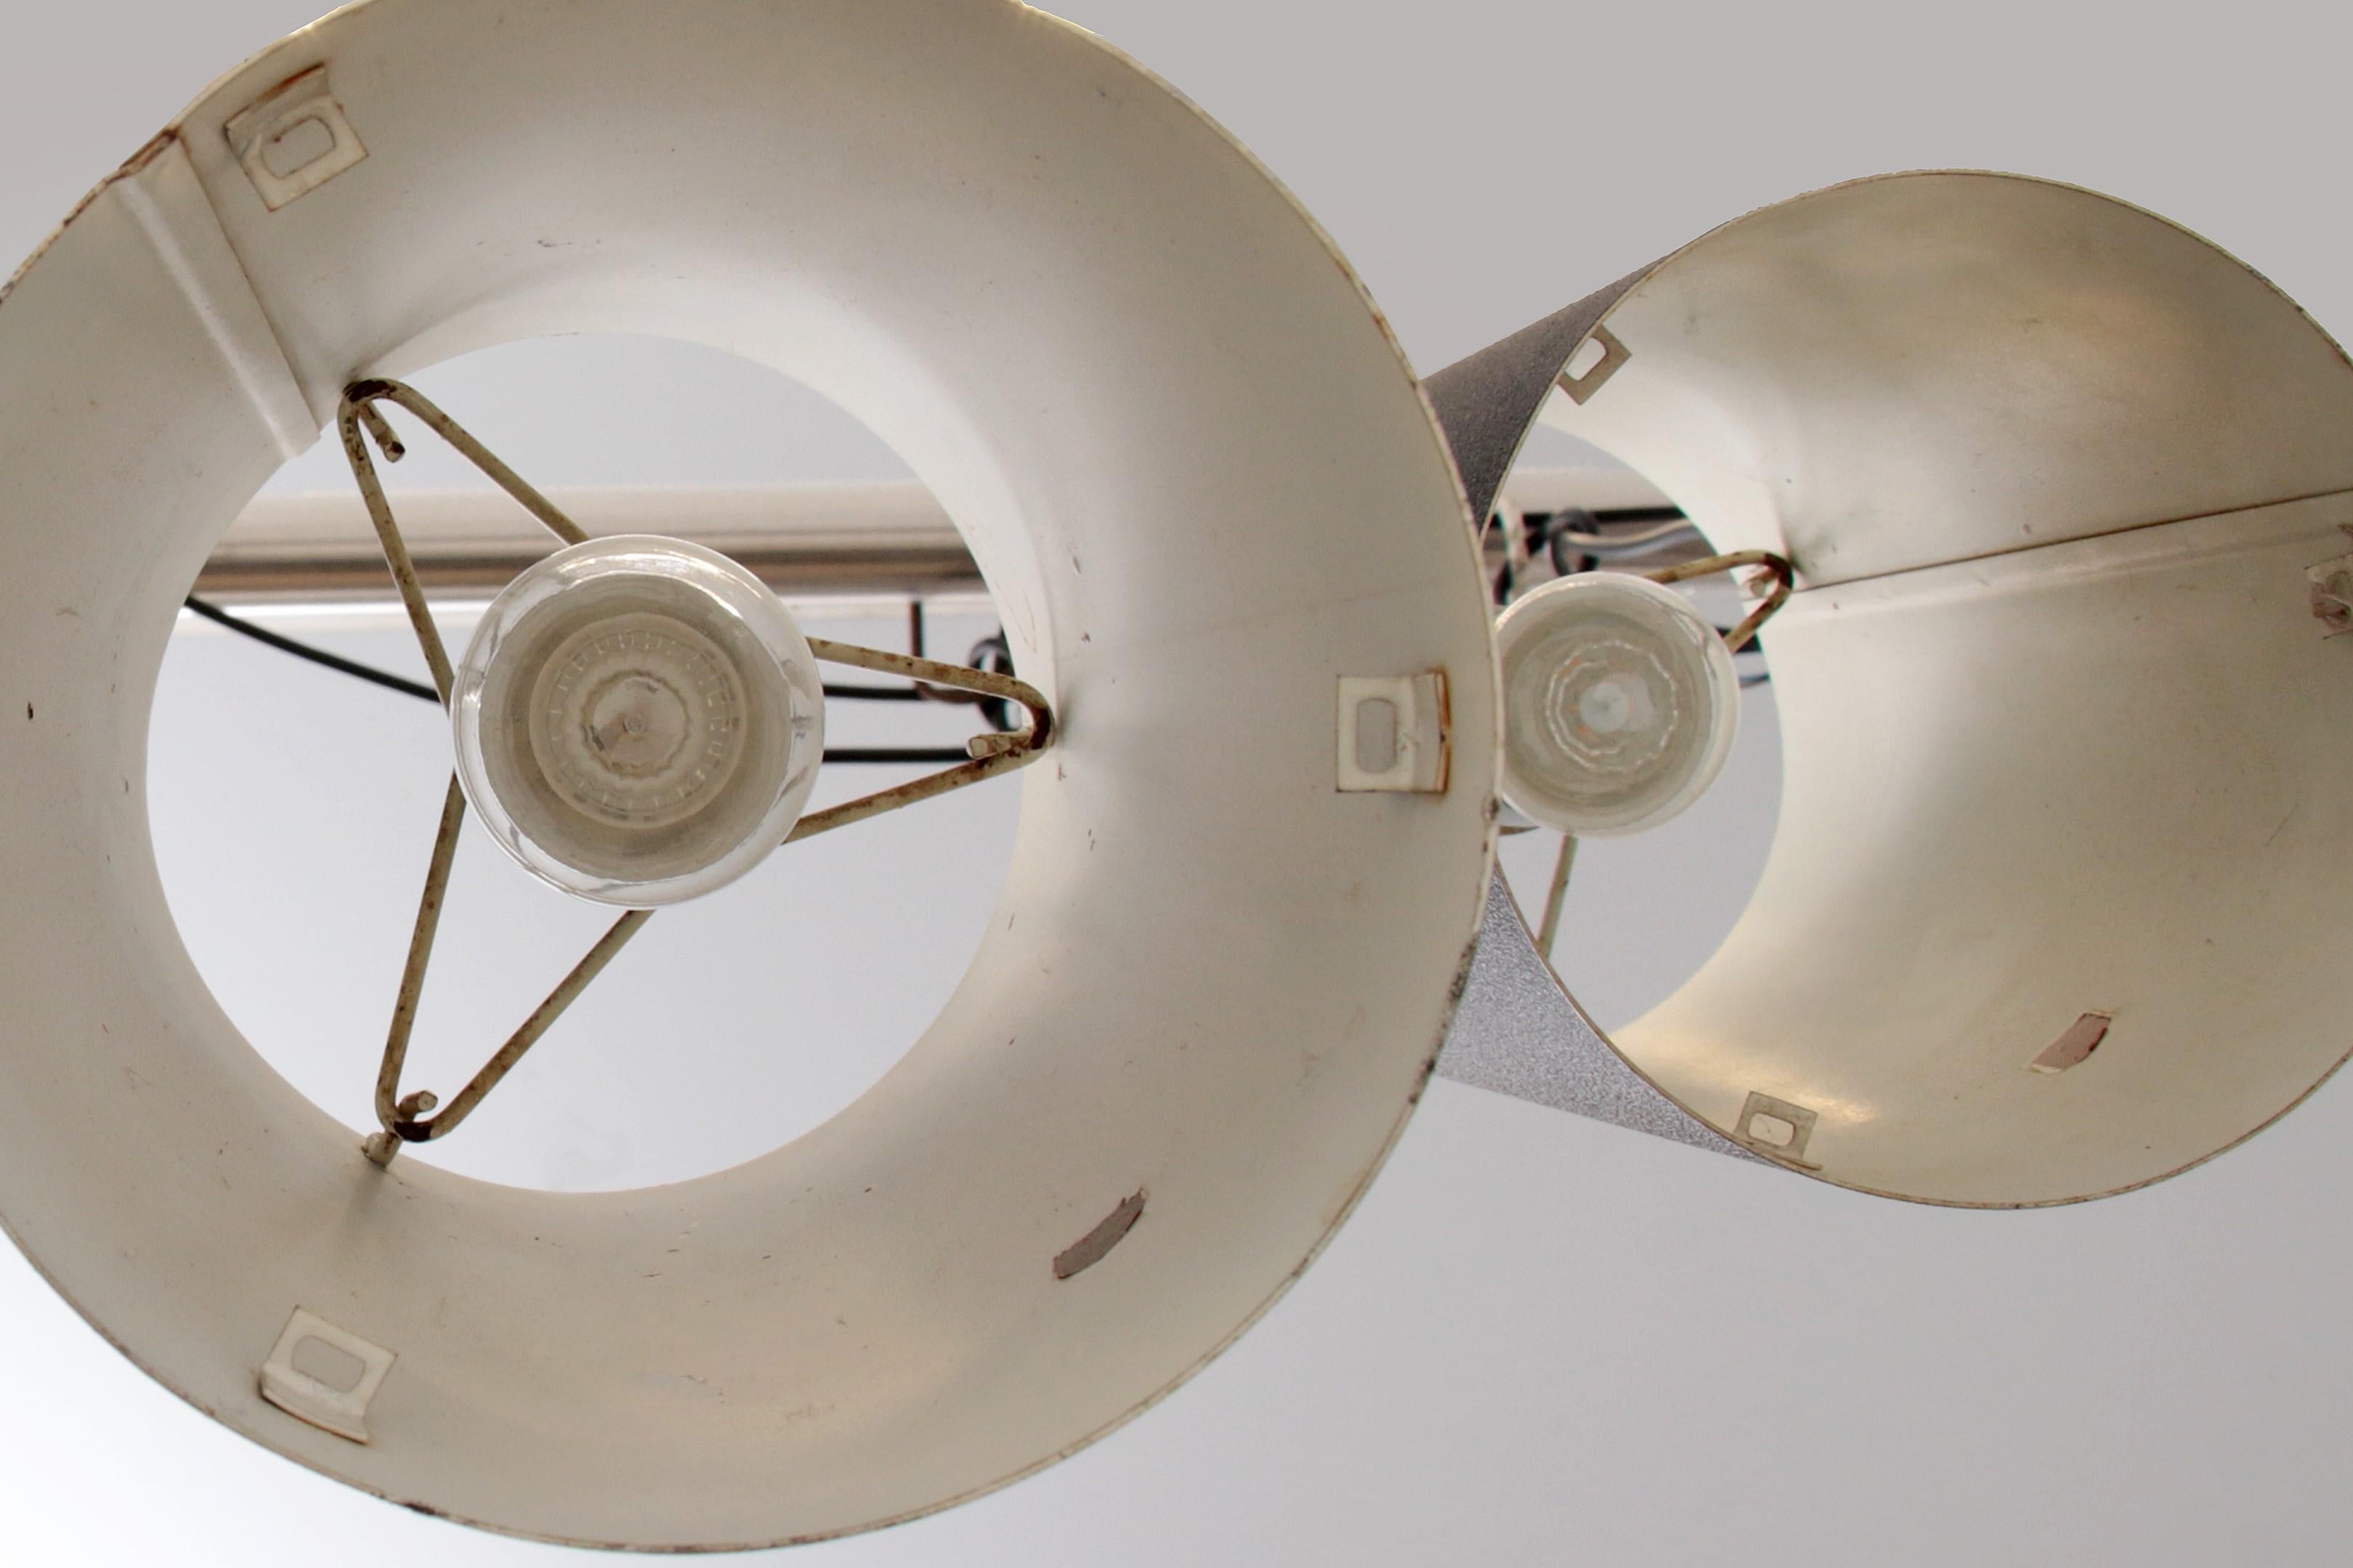 Philips Set of 2 Hanging Lamps Model Nt 48 Design by Argenta, 1960 For Sale 1